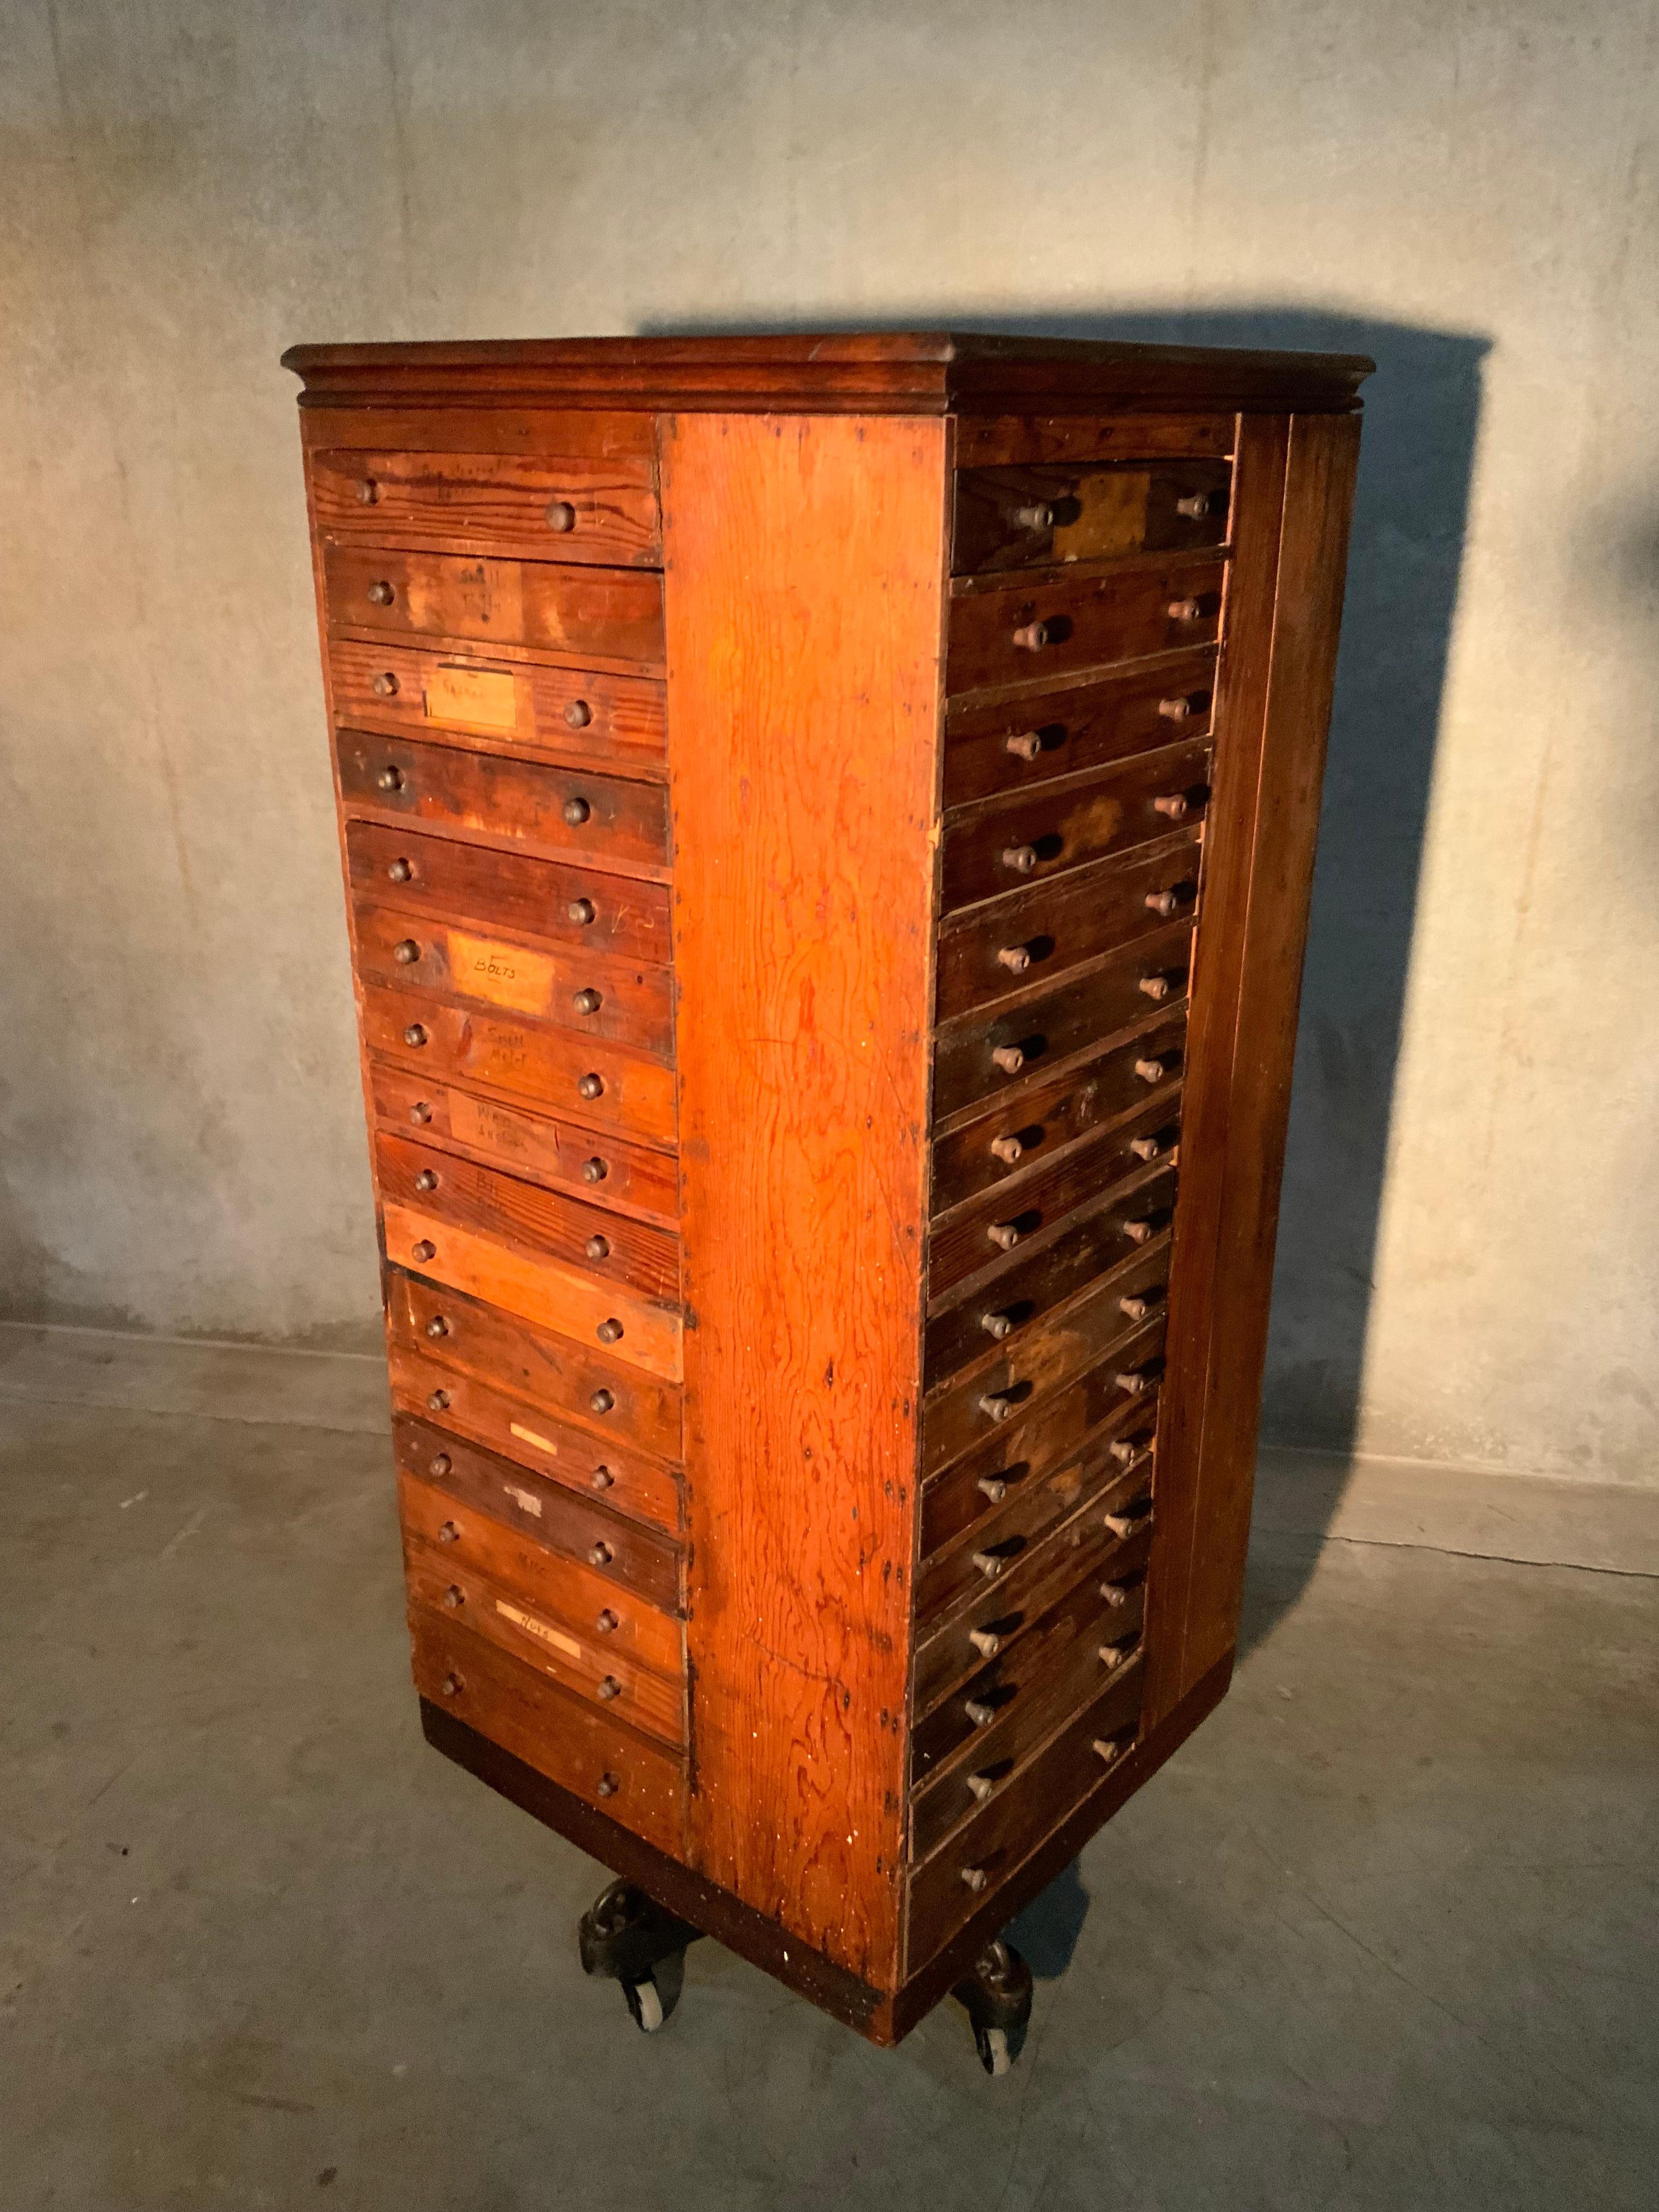 Found in Kentucky this early 20th c bolt bin has multiple original drawers with various tags along with a cast iron base and full functionality.
The patina is fabulous and configuration is perfect.